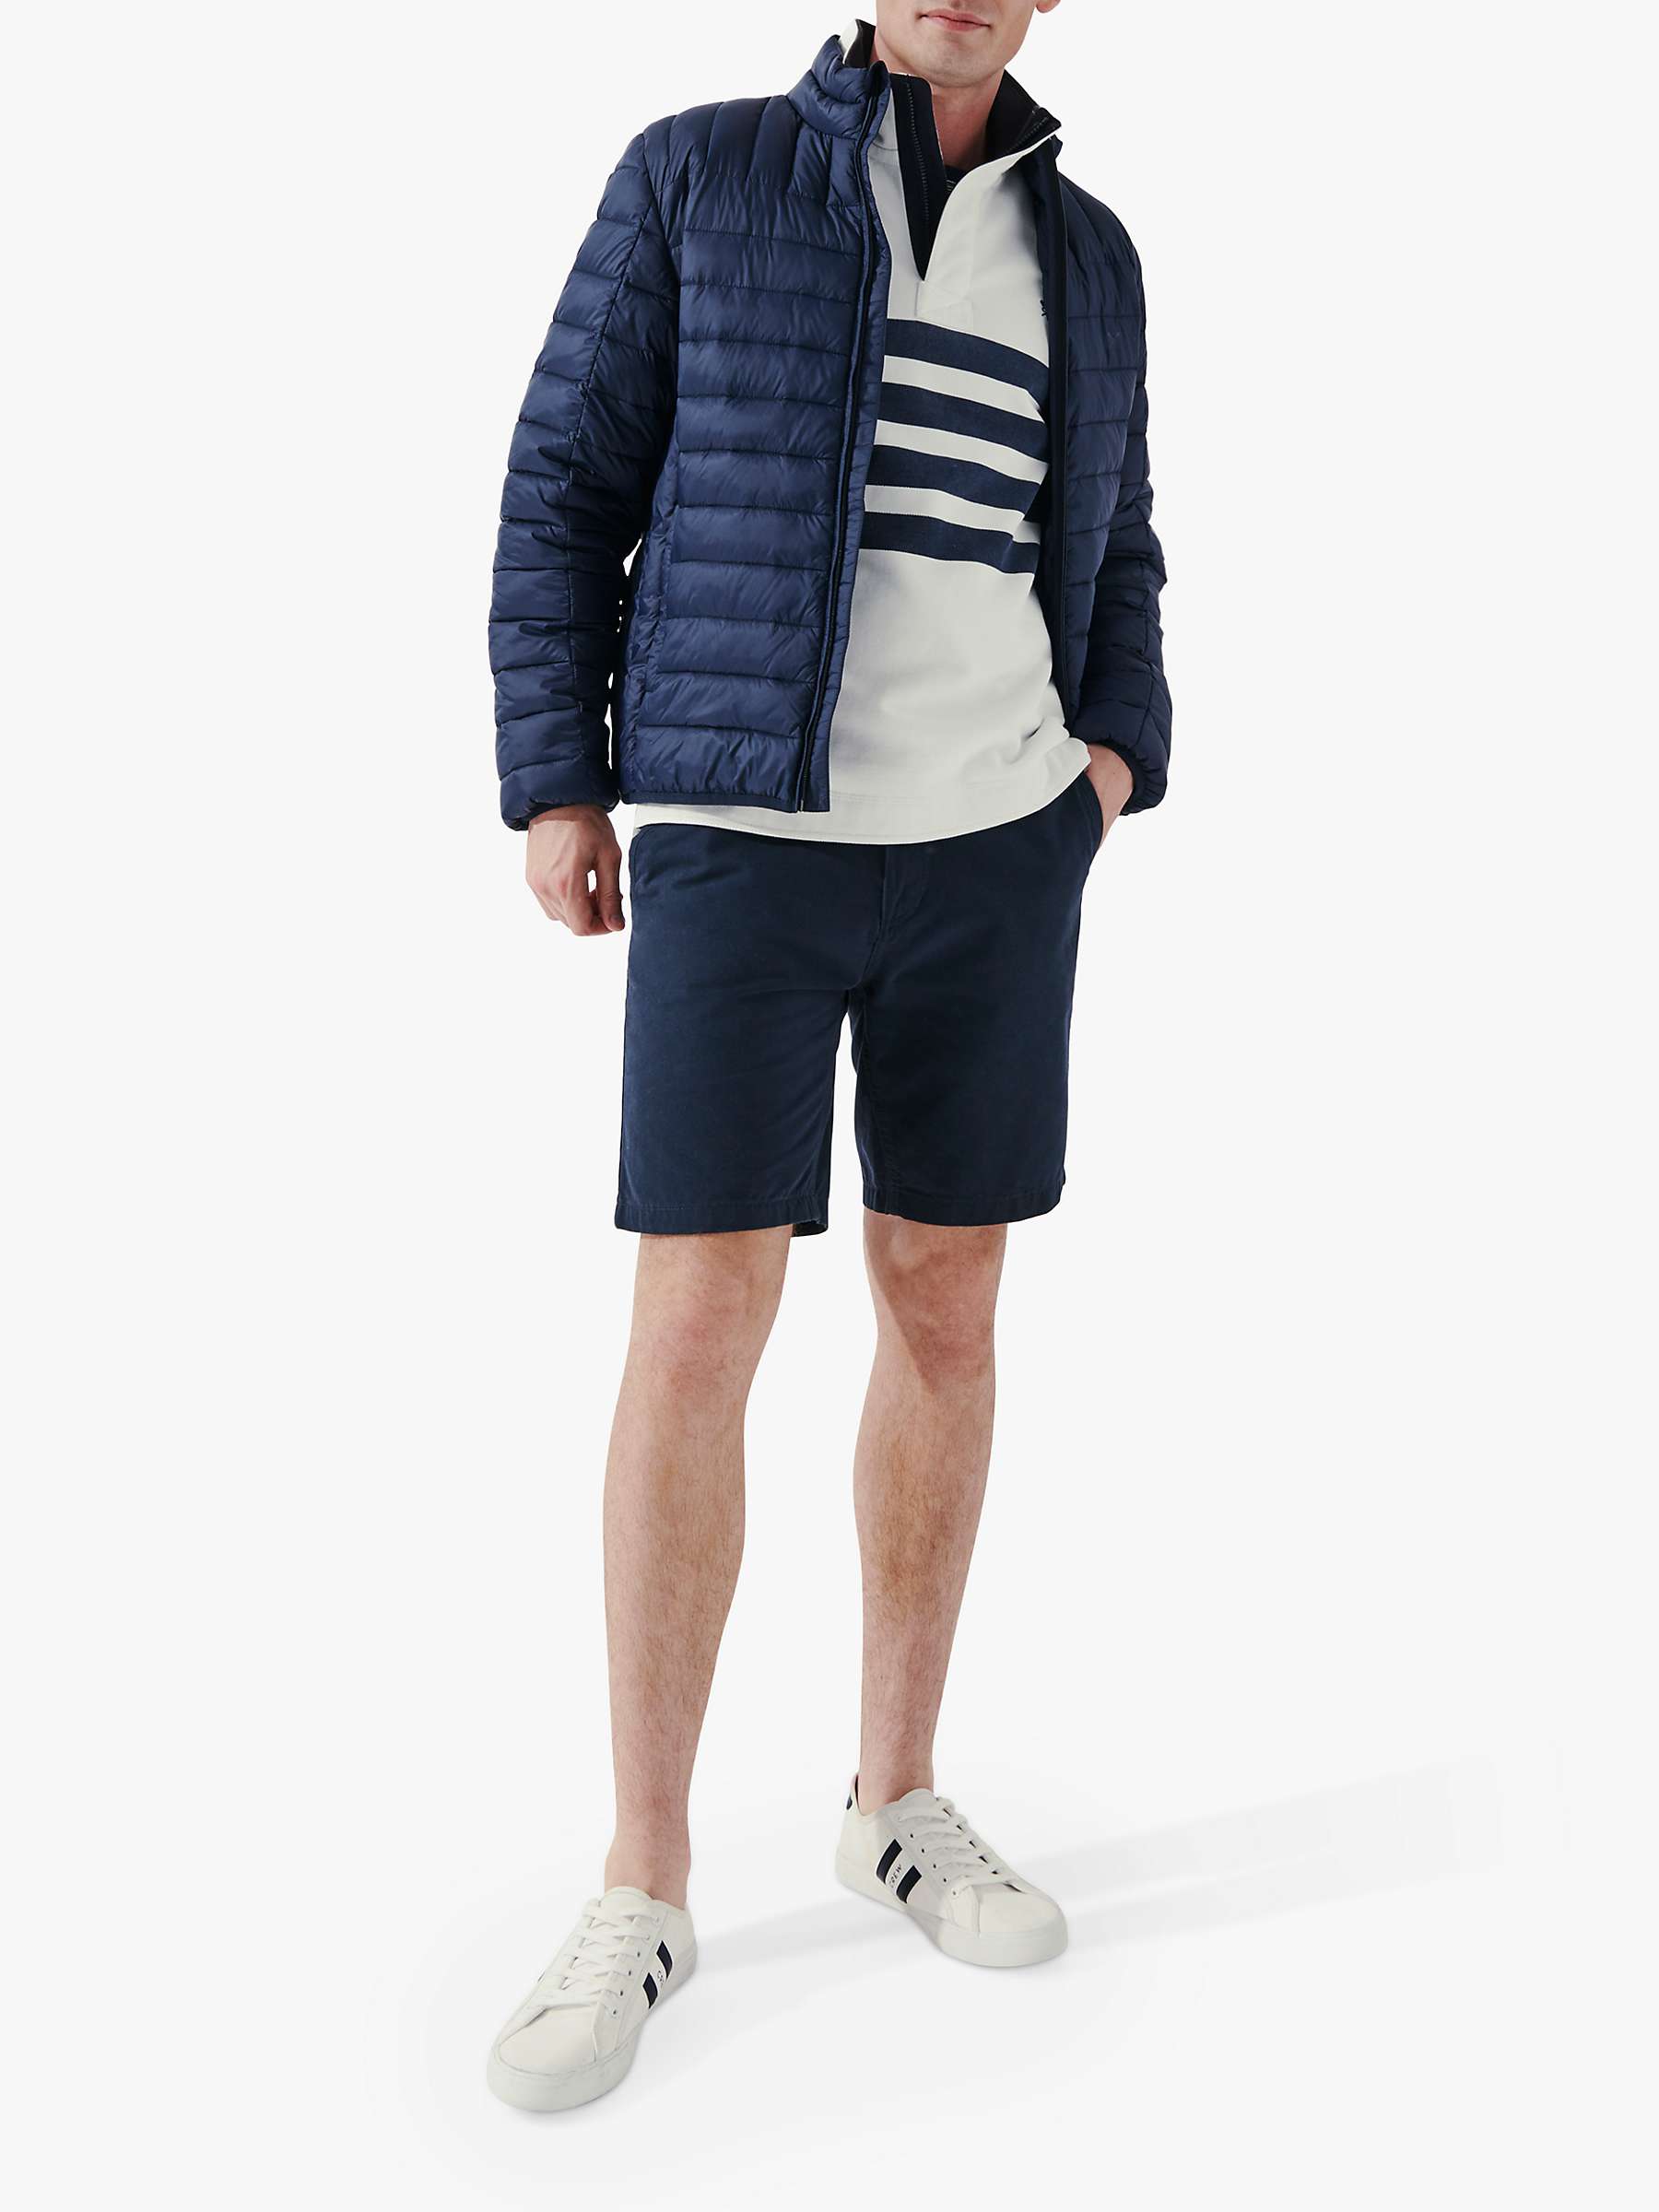 Crew Clothing Lowther Lightweight Jacket, Navy Blue at John Lewis ...